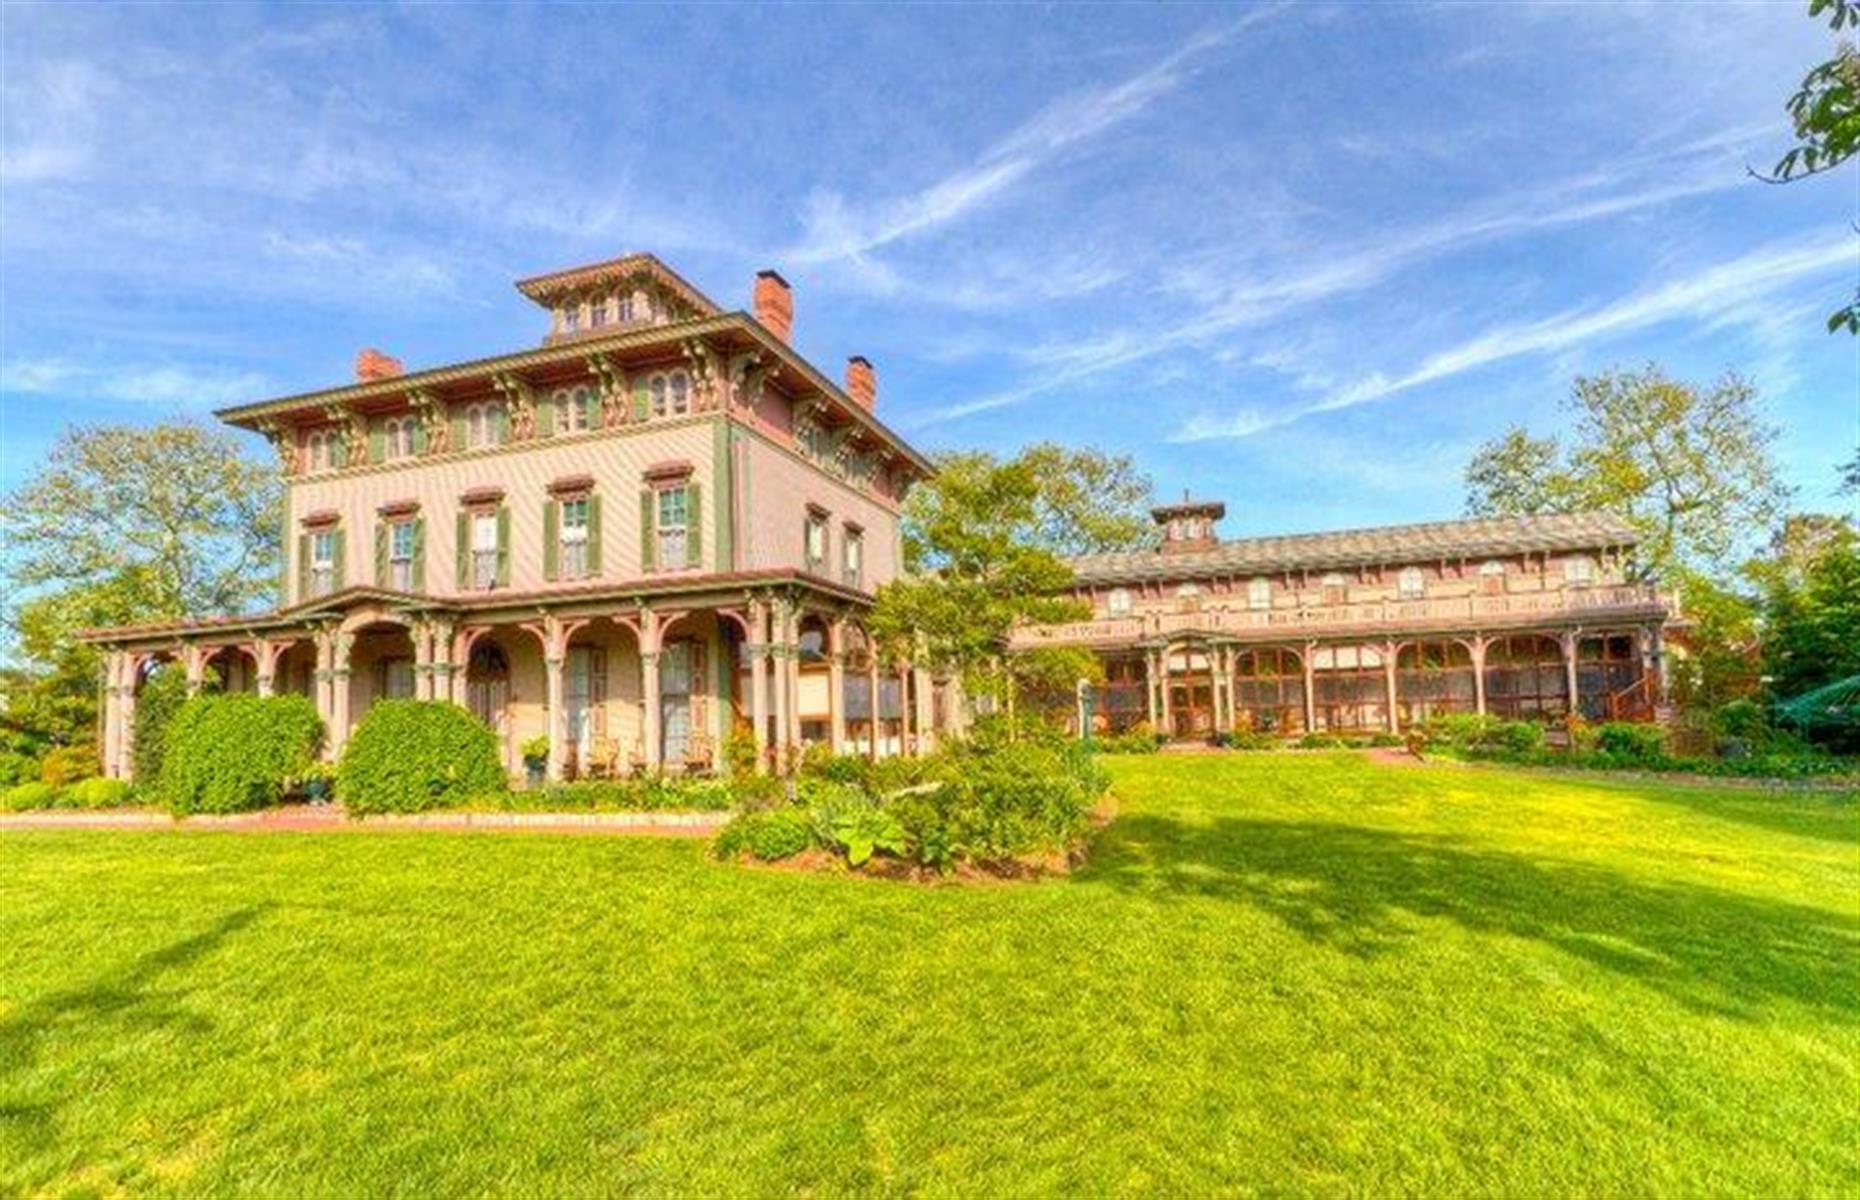 <p>Built in 1863, <a href="https://www.booking.com/hotel/us/southern-mansion.en-gb.html?aid=1280739" rel="nofollow” target=">this stunning coastal villa</a> was the country estate of the Allen family until 1946, when the last of original owner's relatives, Ester Mercur, passed away. Her husband sold the estate with all its furnishings and it seems like Ester never really left either. Said to haunt the resort to this day, guests have reported hearing laughter and rustling petticoats as well as smelling a strong perfume waft in the corridors and feeling a ghostly presence. </p>